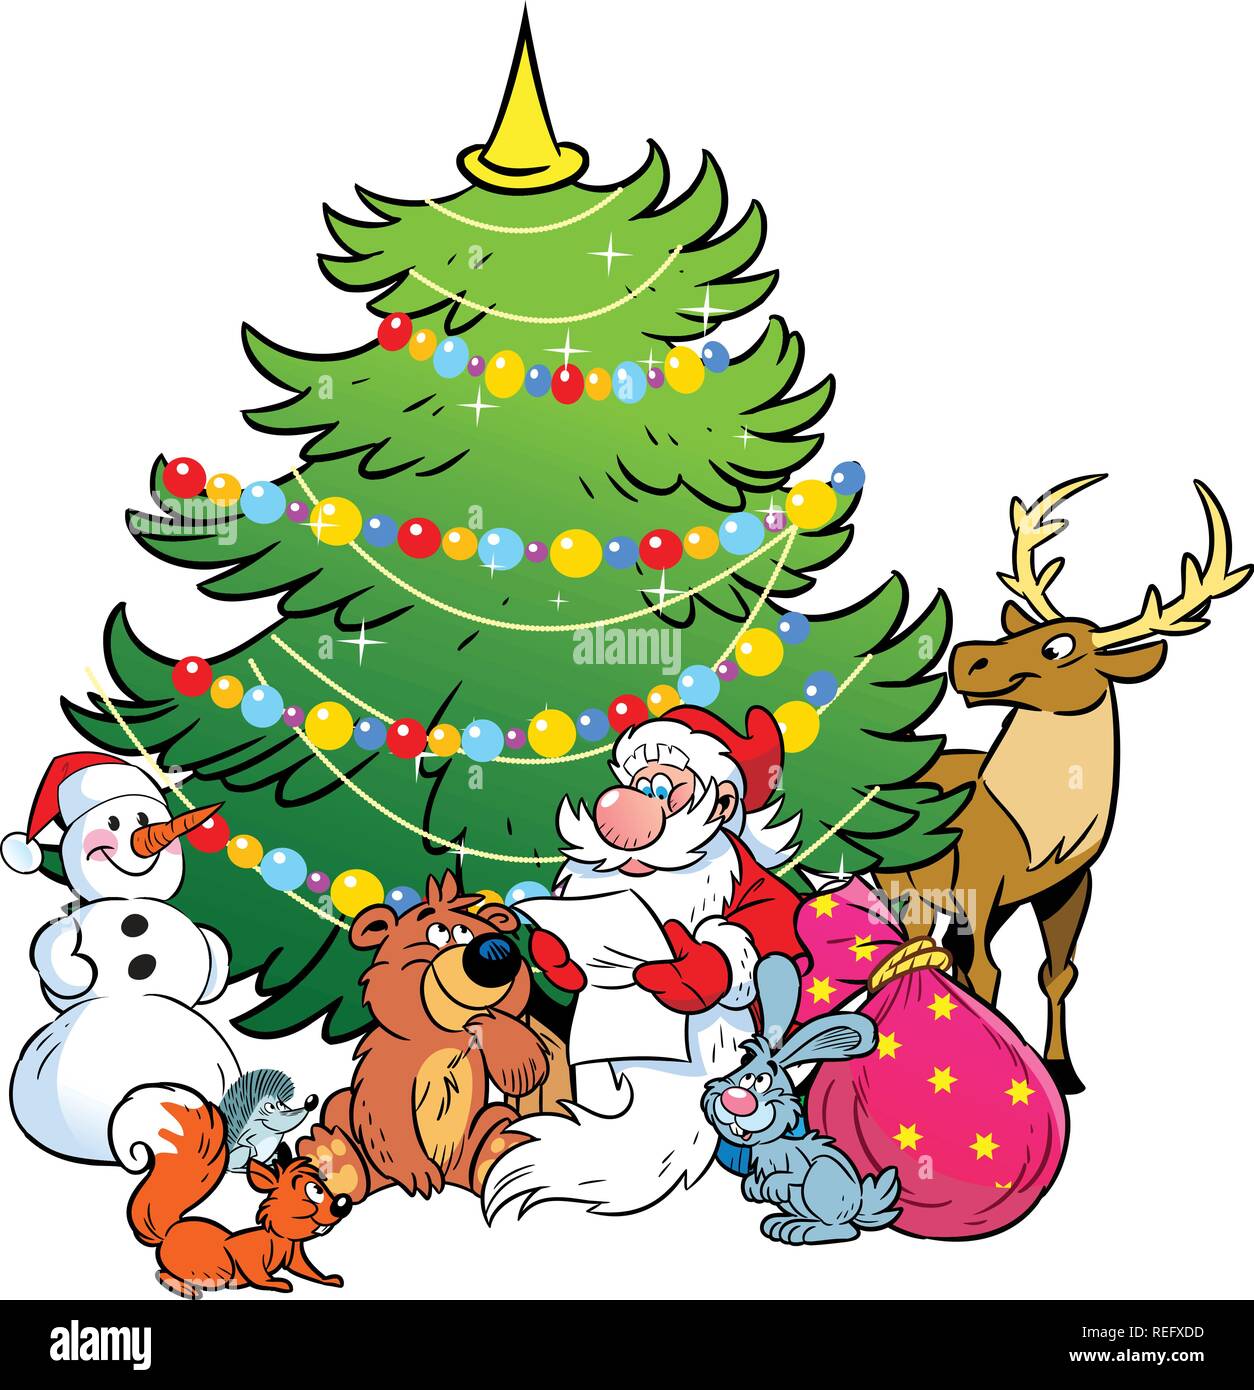 The illustration shows the snowman and Santa Claus, who reads the list of holiday gifts for animals on the background of Christmas tree. Stock Vector